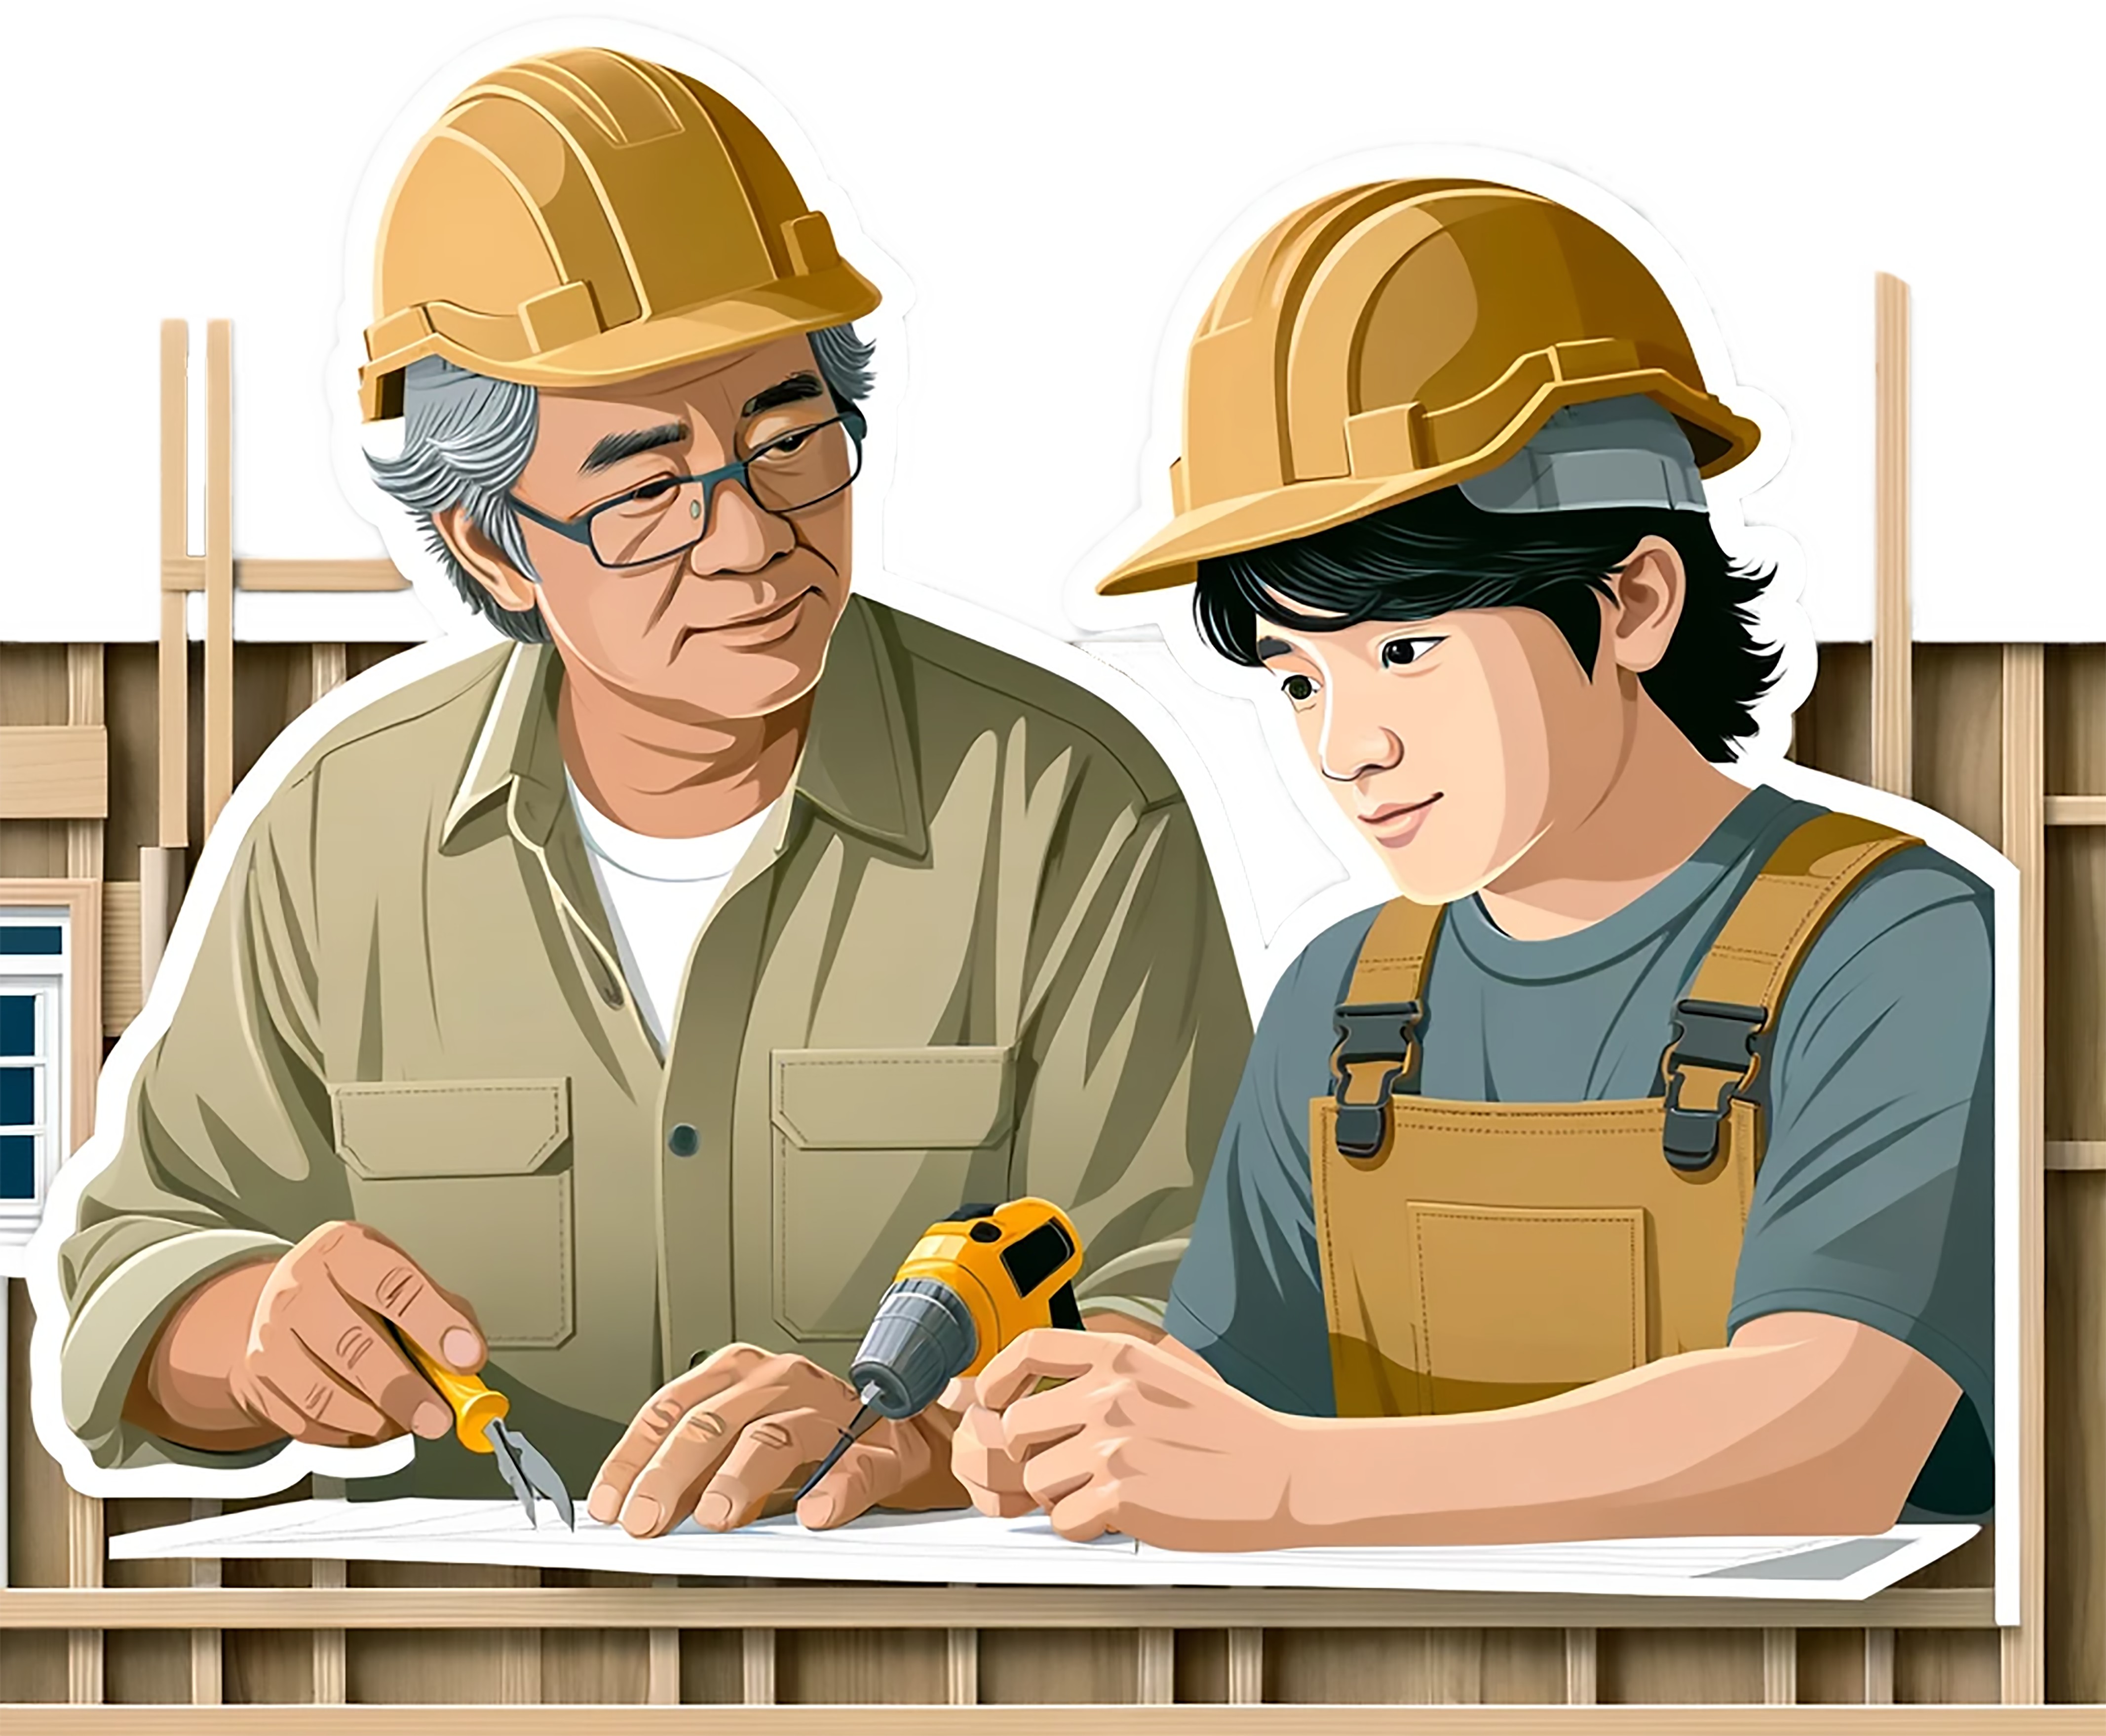 Illustration of an instructor and apprentice working together on a project.